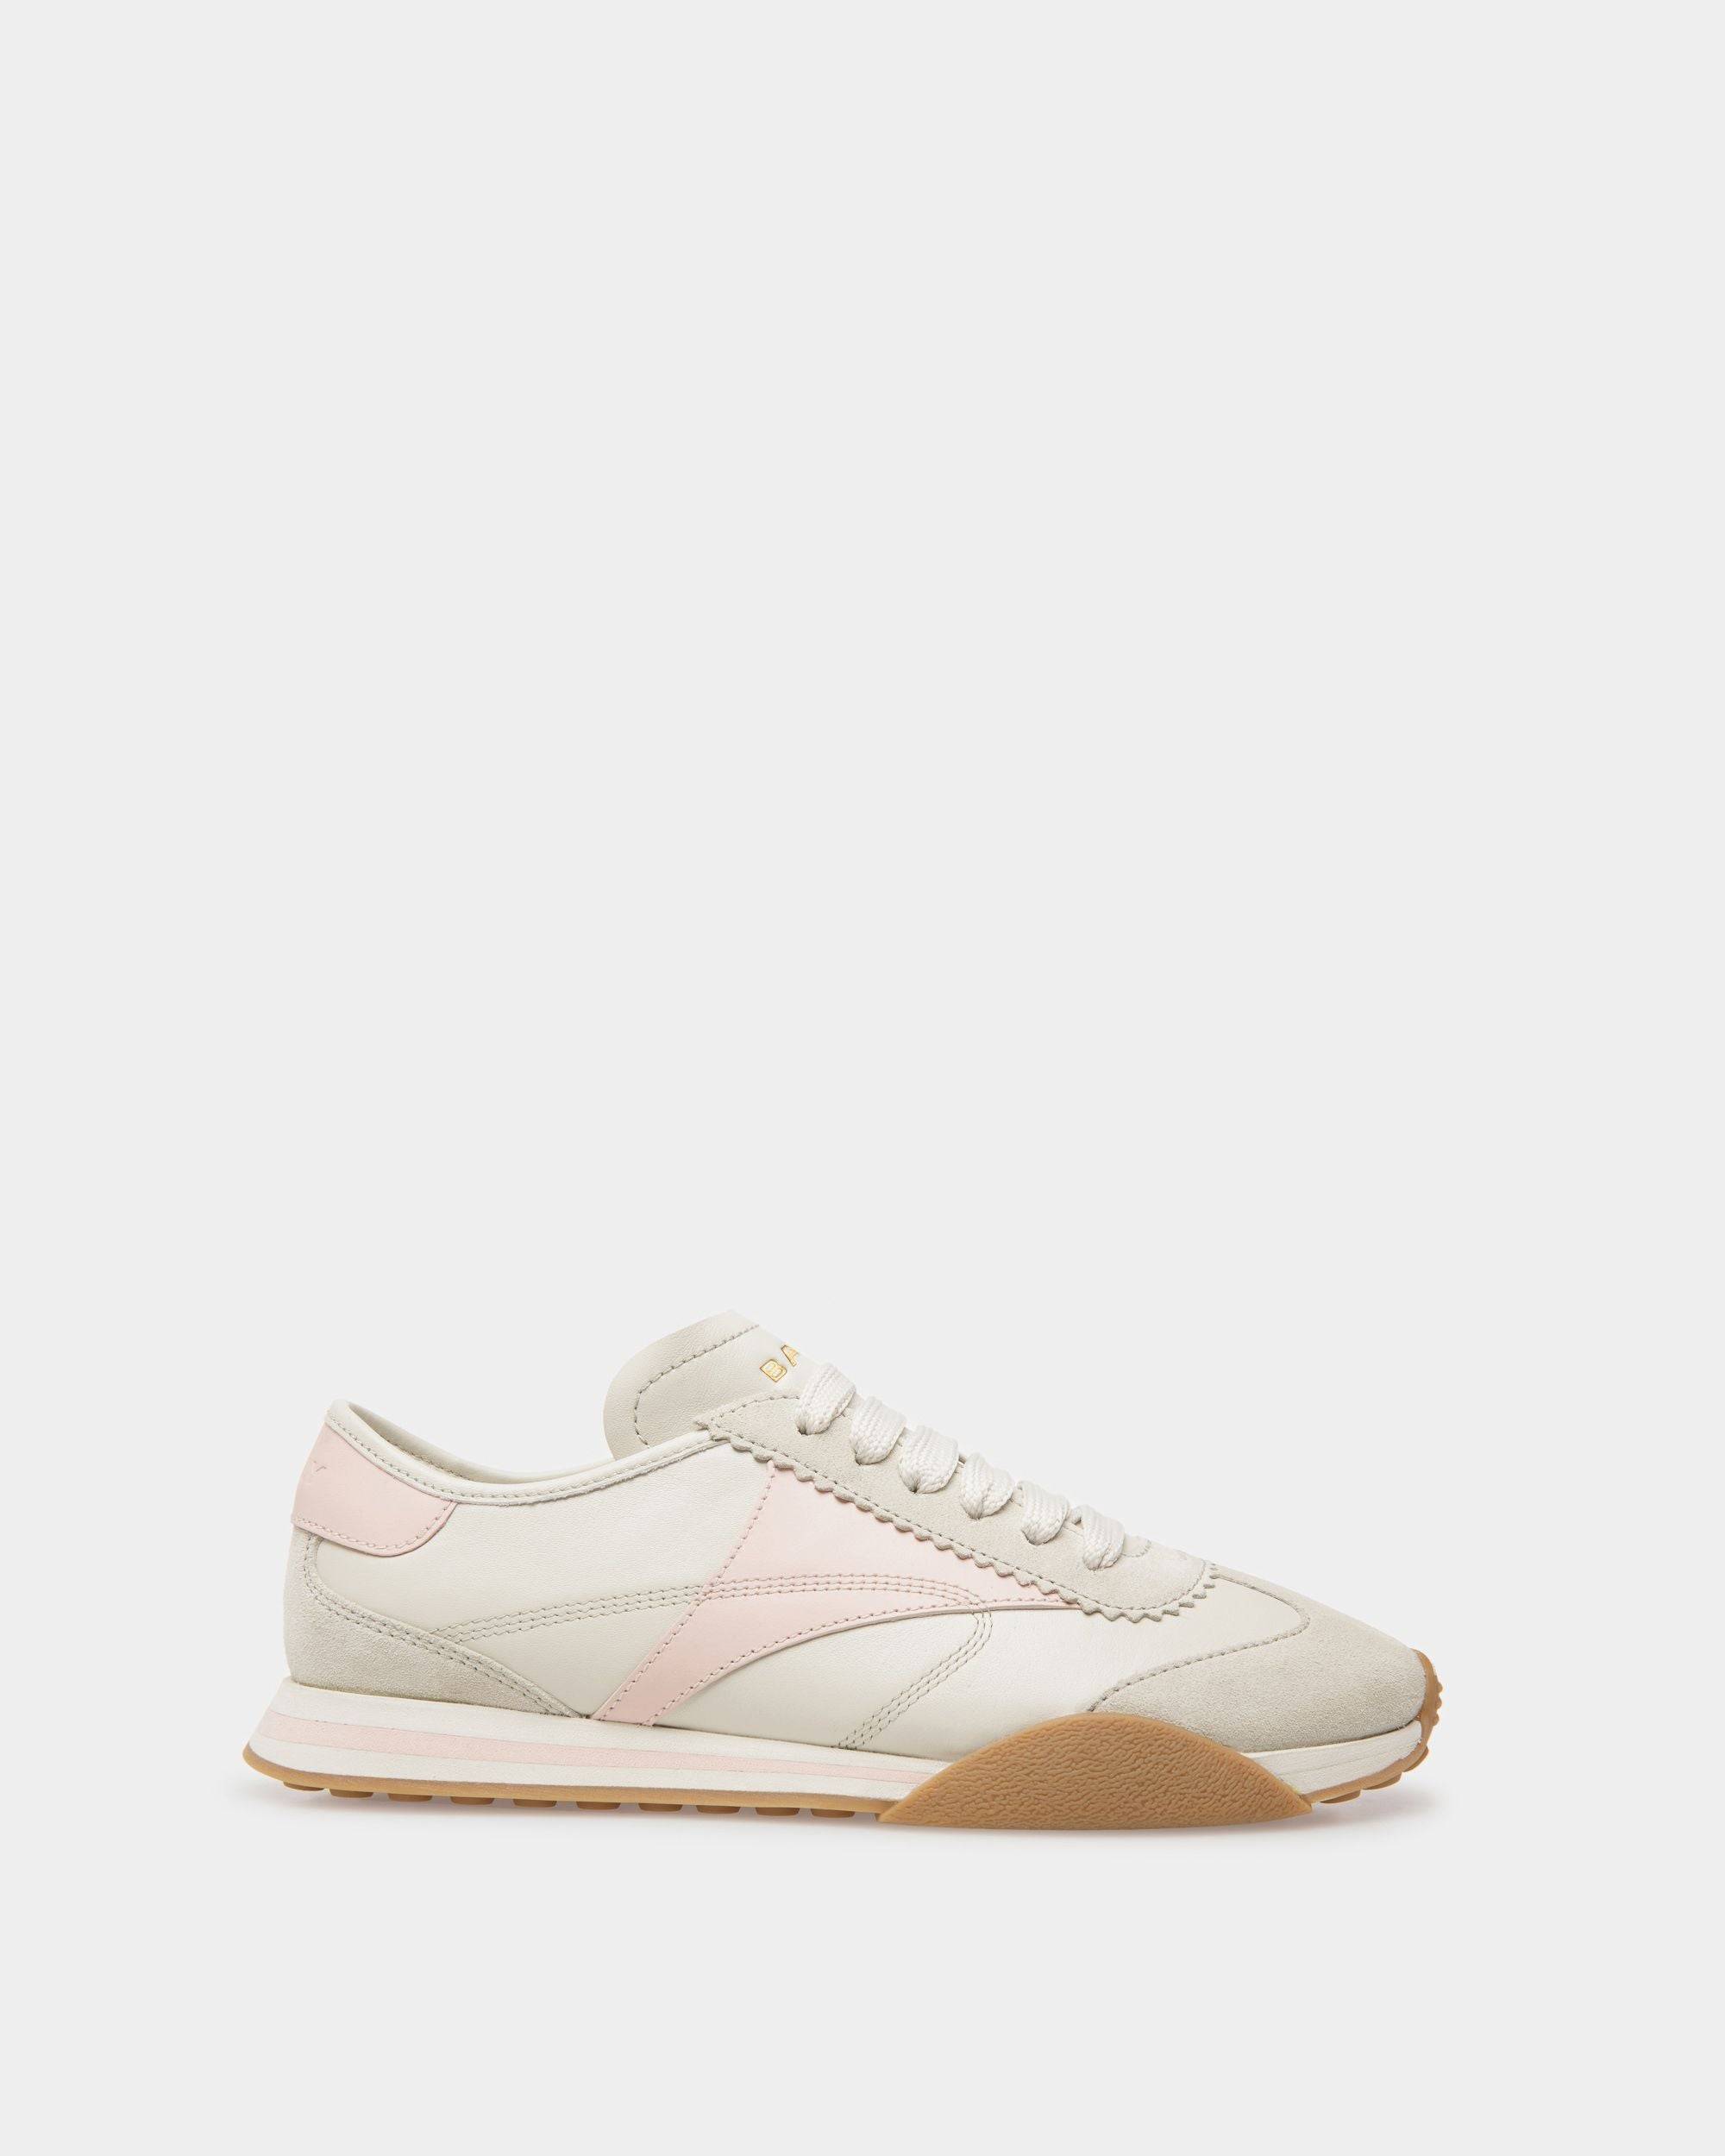 Women's Sussex Sneakers In Dusty White And Rose Leather | Bally | Still Life Side